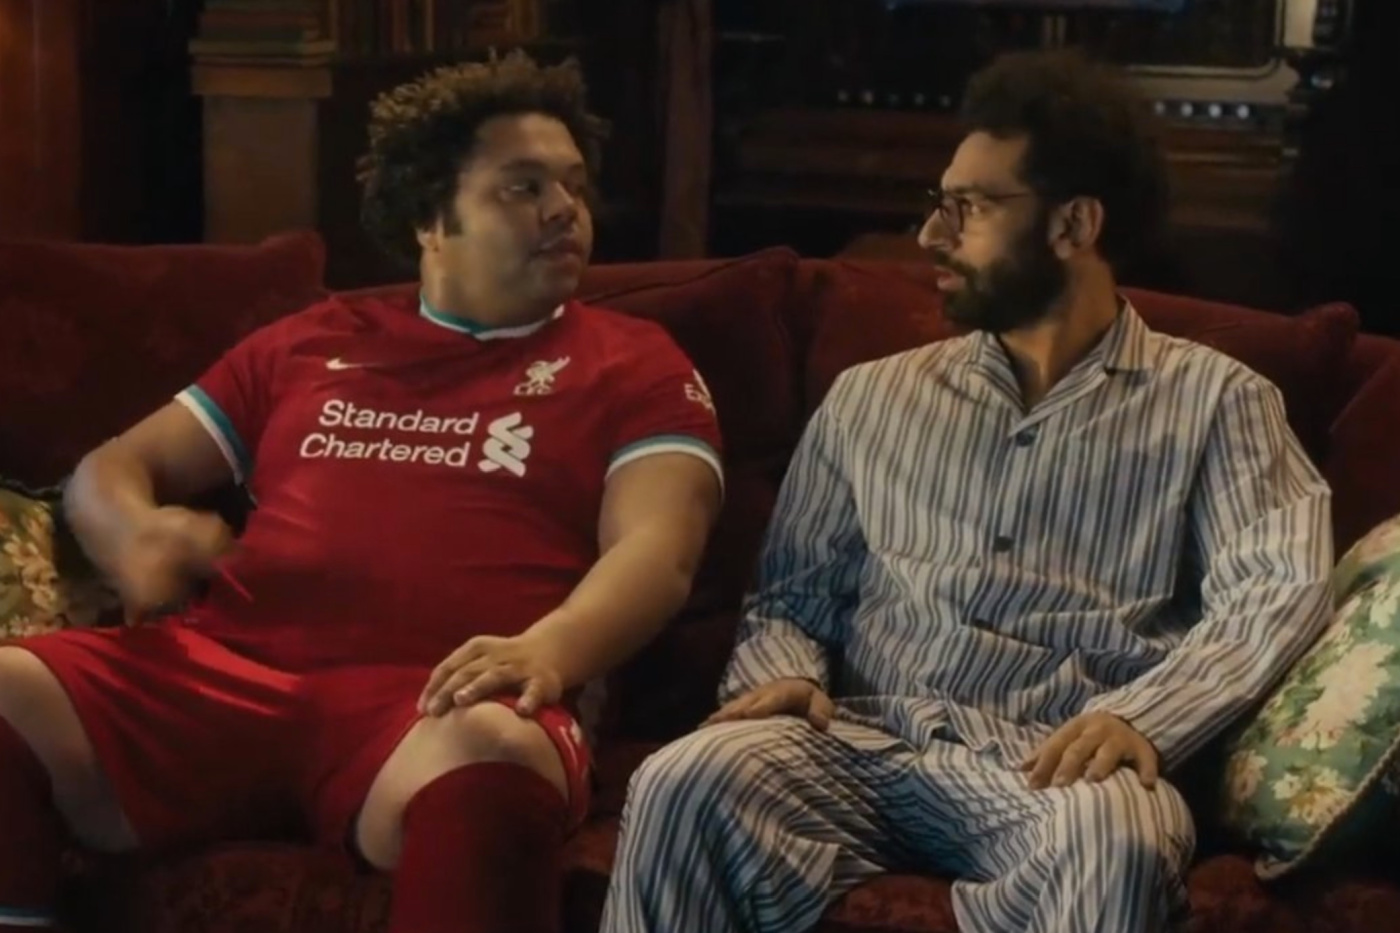 Egyptian fan tells Mo Salah to ‘put Hendo on the wing’ in brilliant new ad